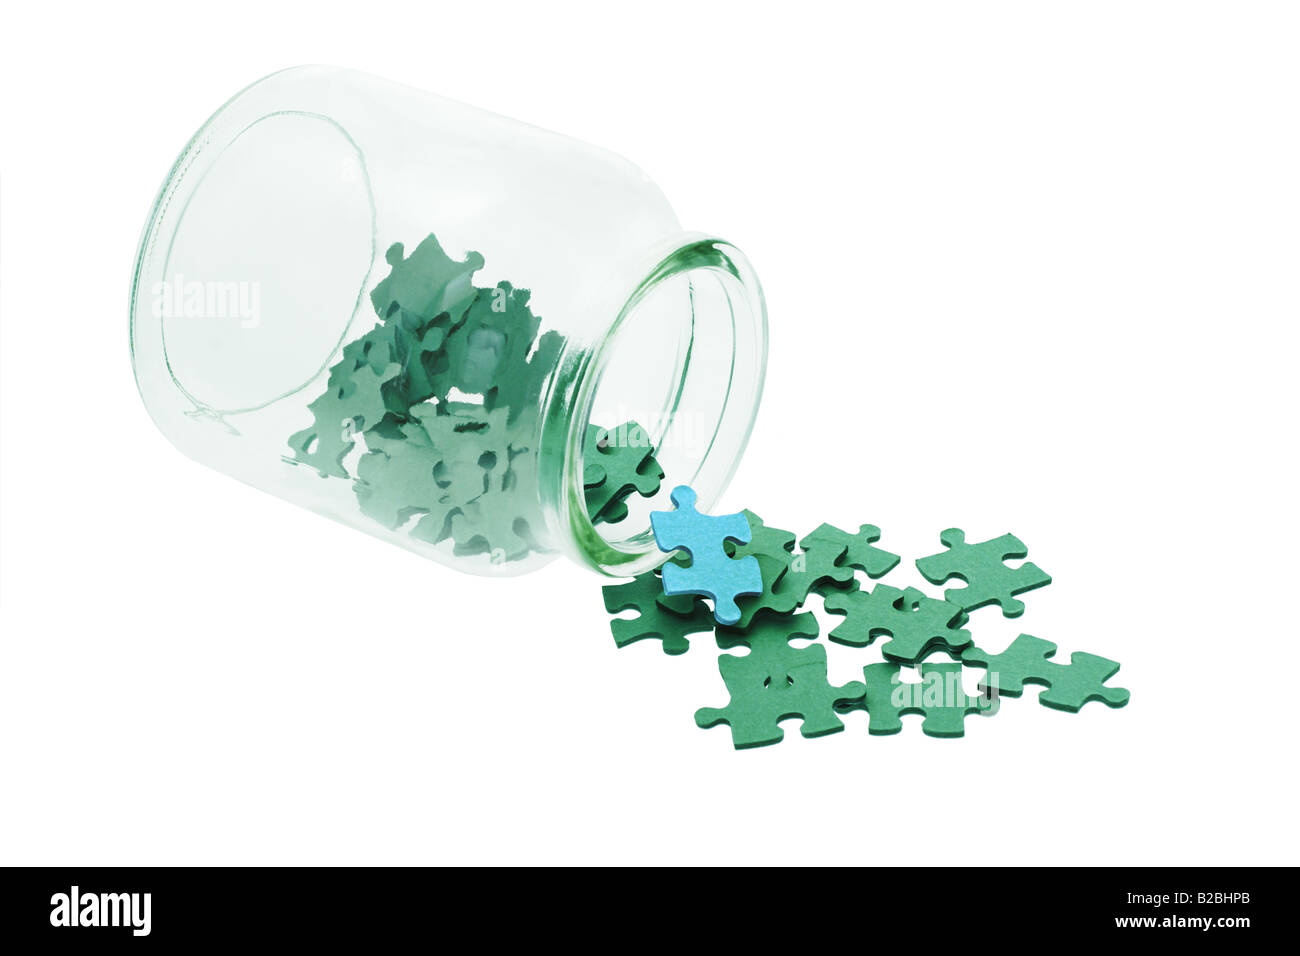 Blue piece among all green jigsaw puzzles spilled from glass bottle Stock Photo